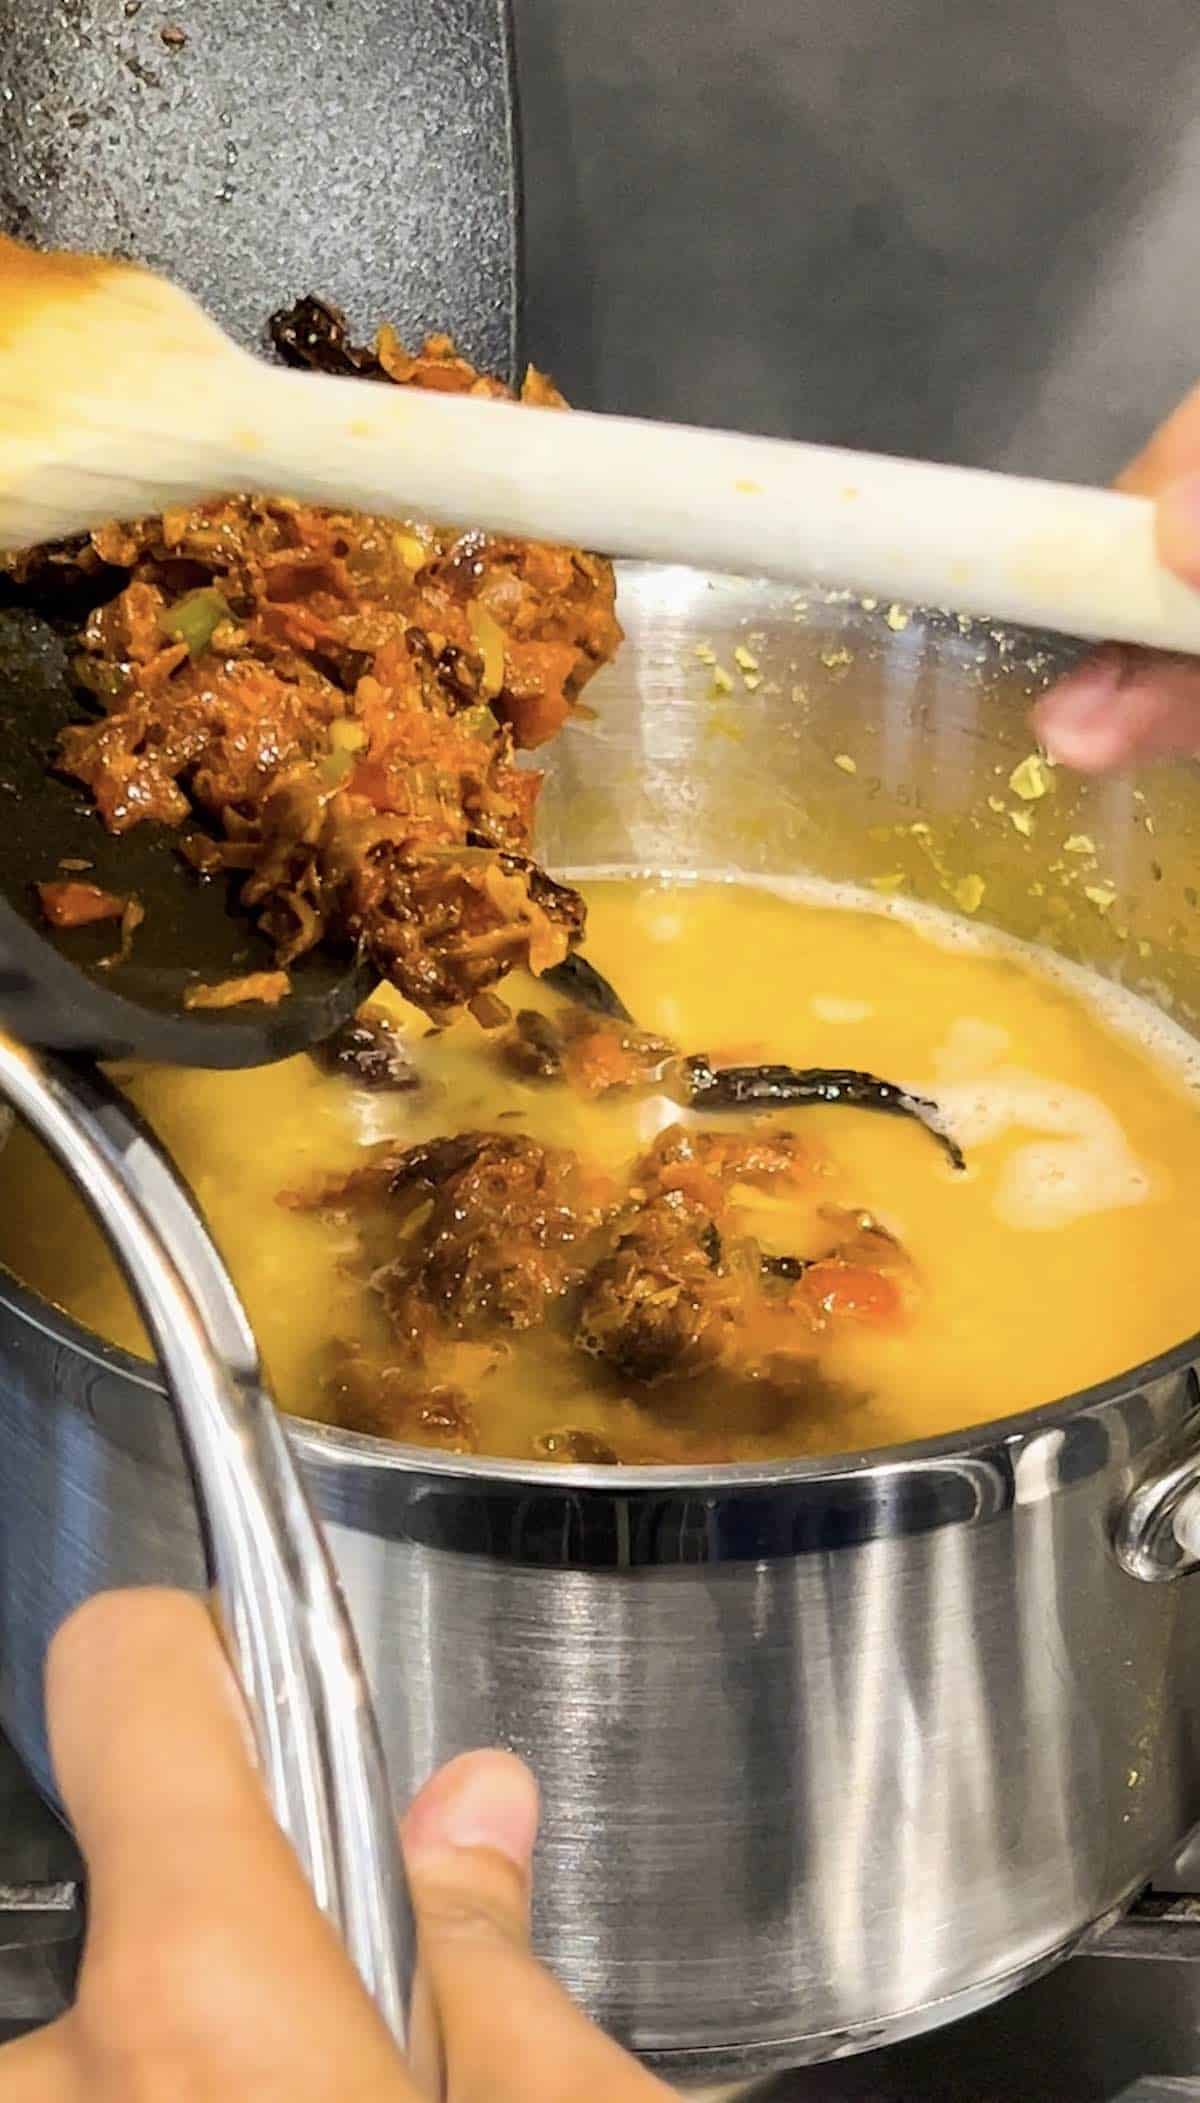 Transfer the tadka to the pot with cooked lentils